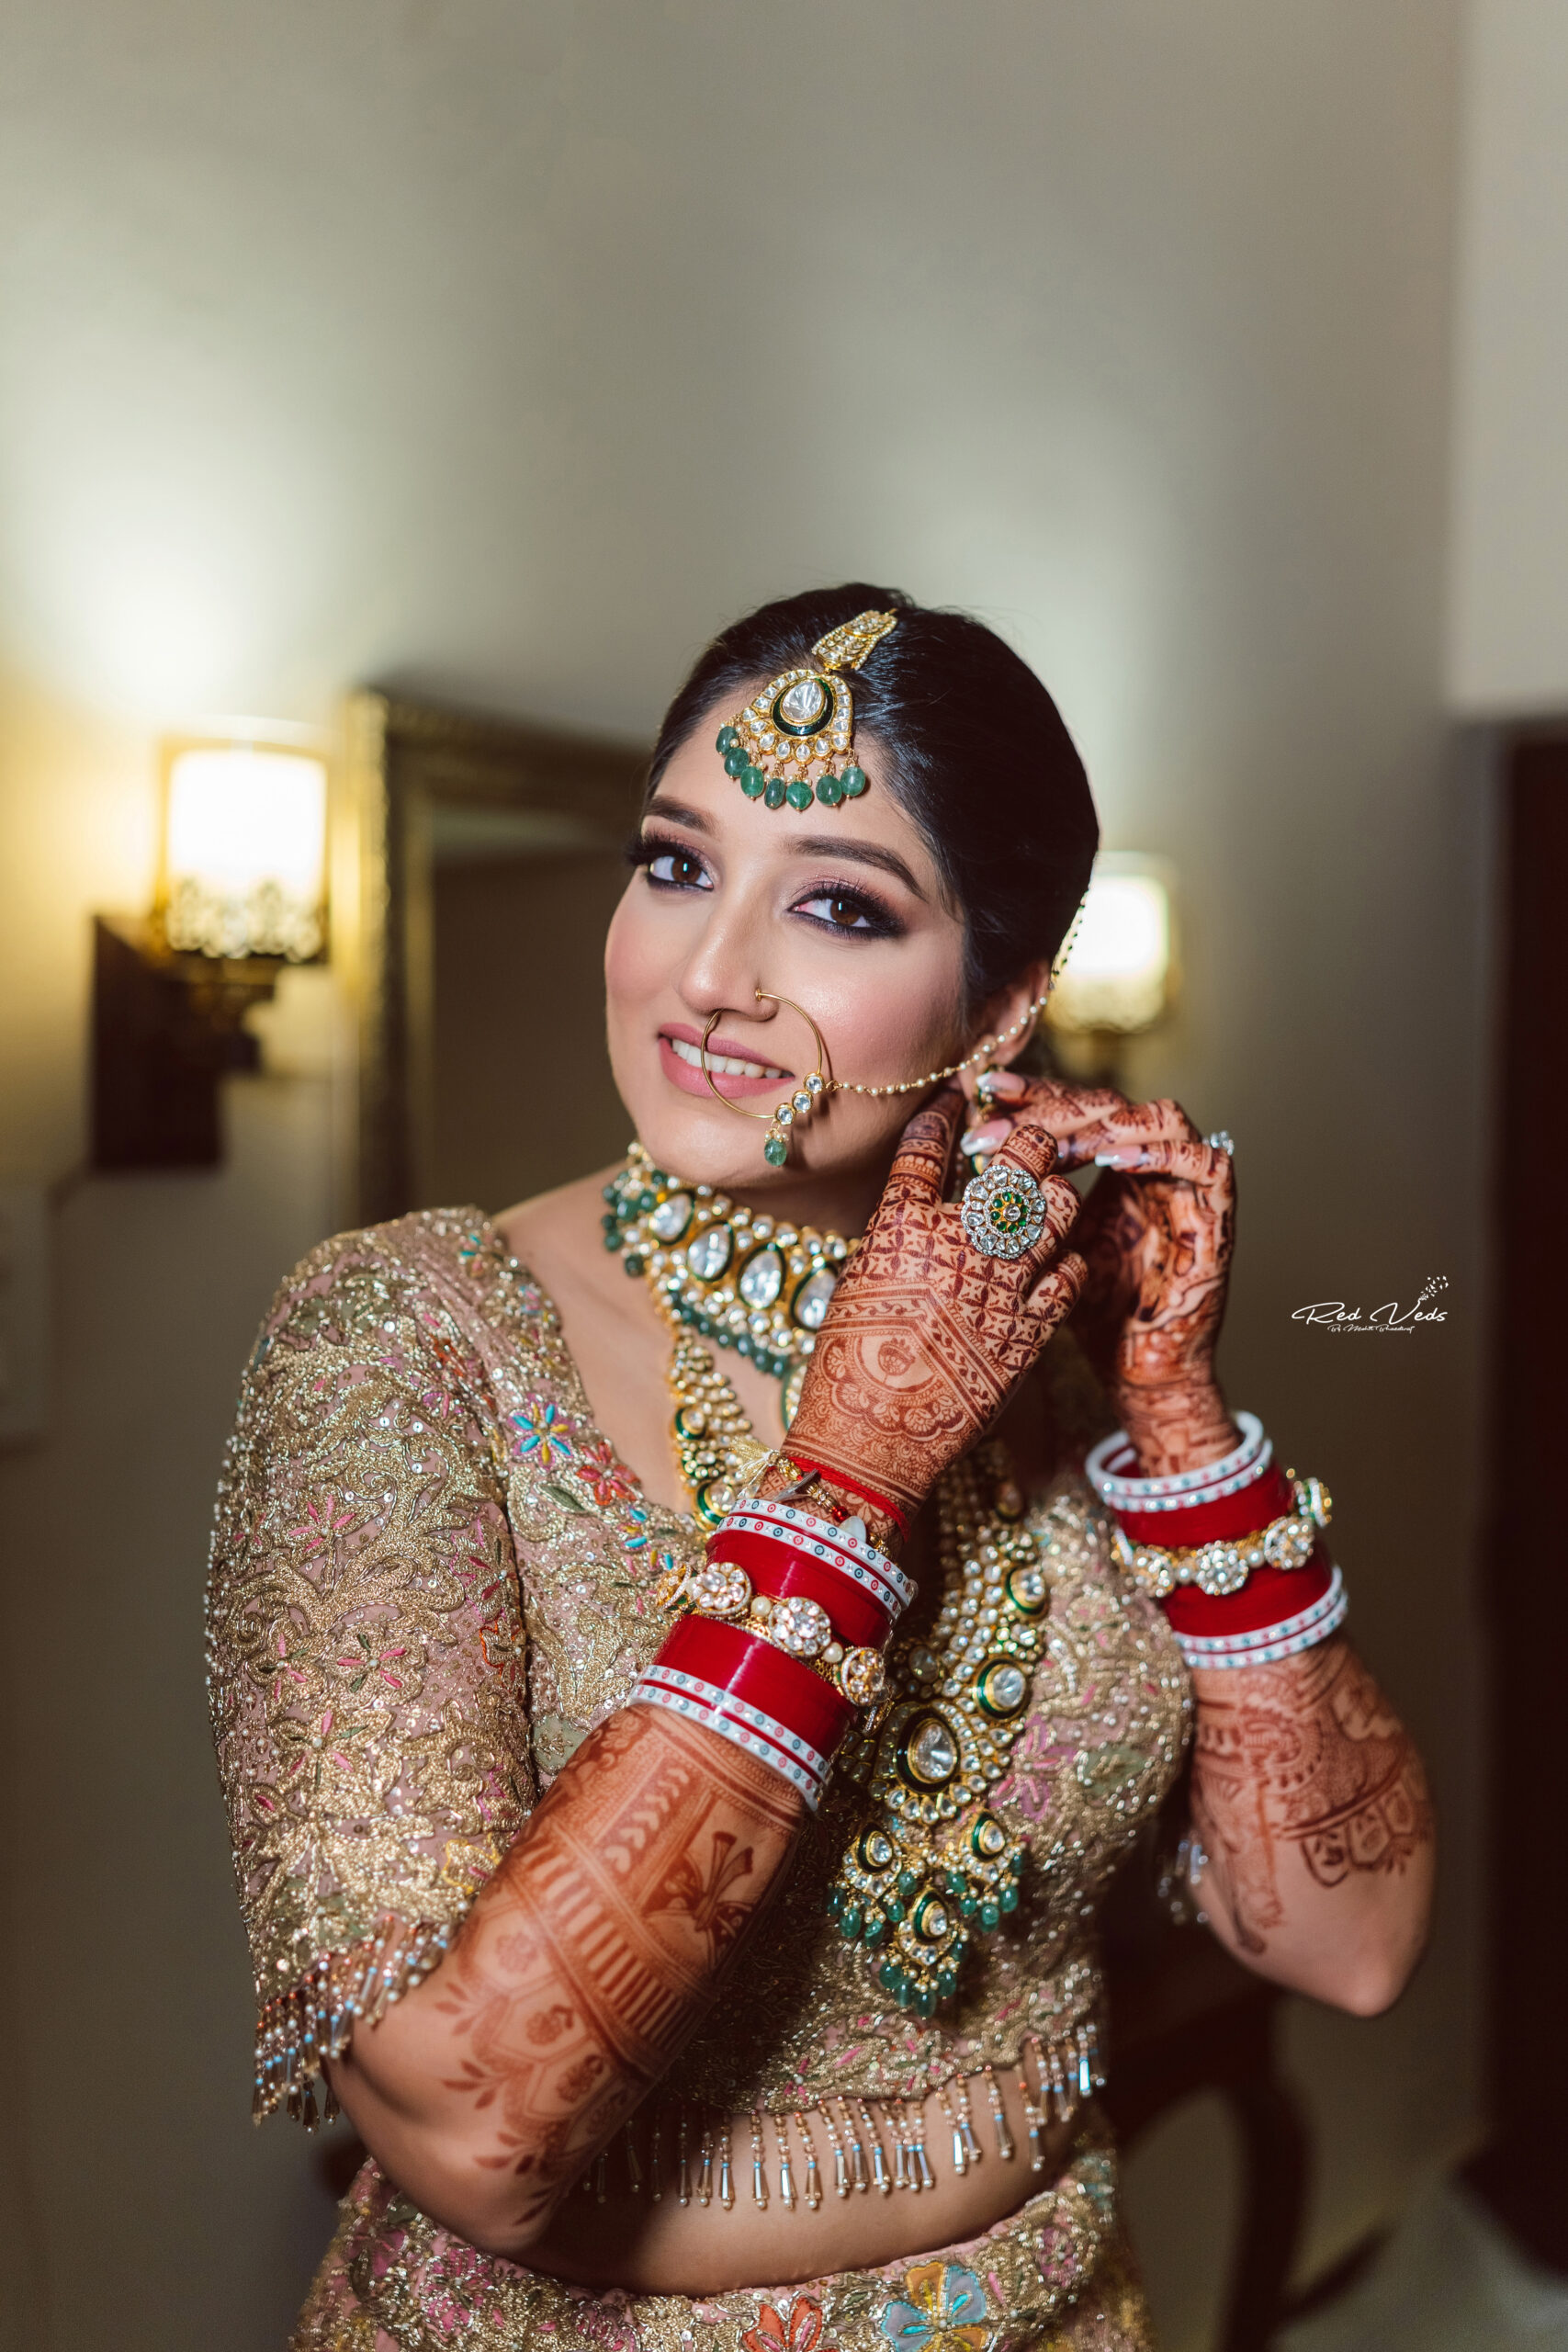 A Beautiful Bride in Red Sari Posing with Her Veil · Free Stock Photo